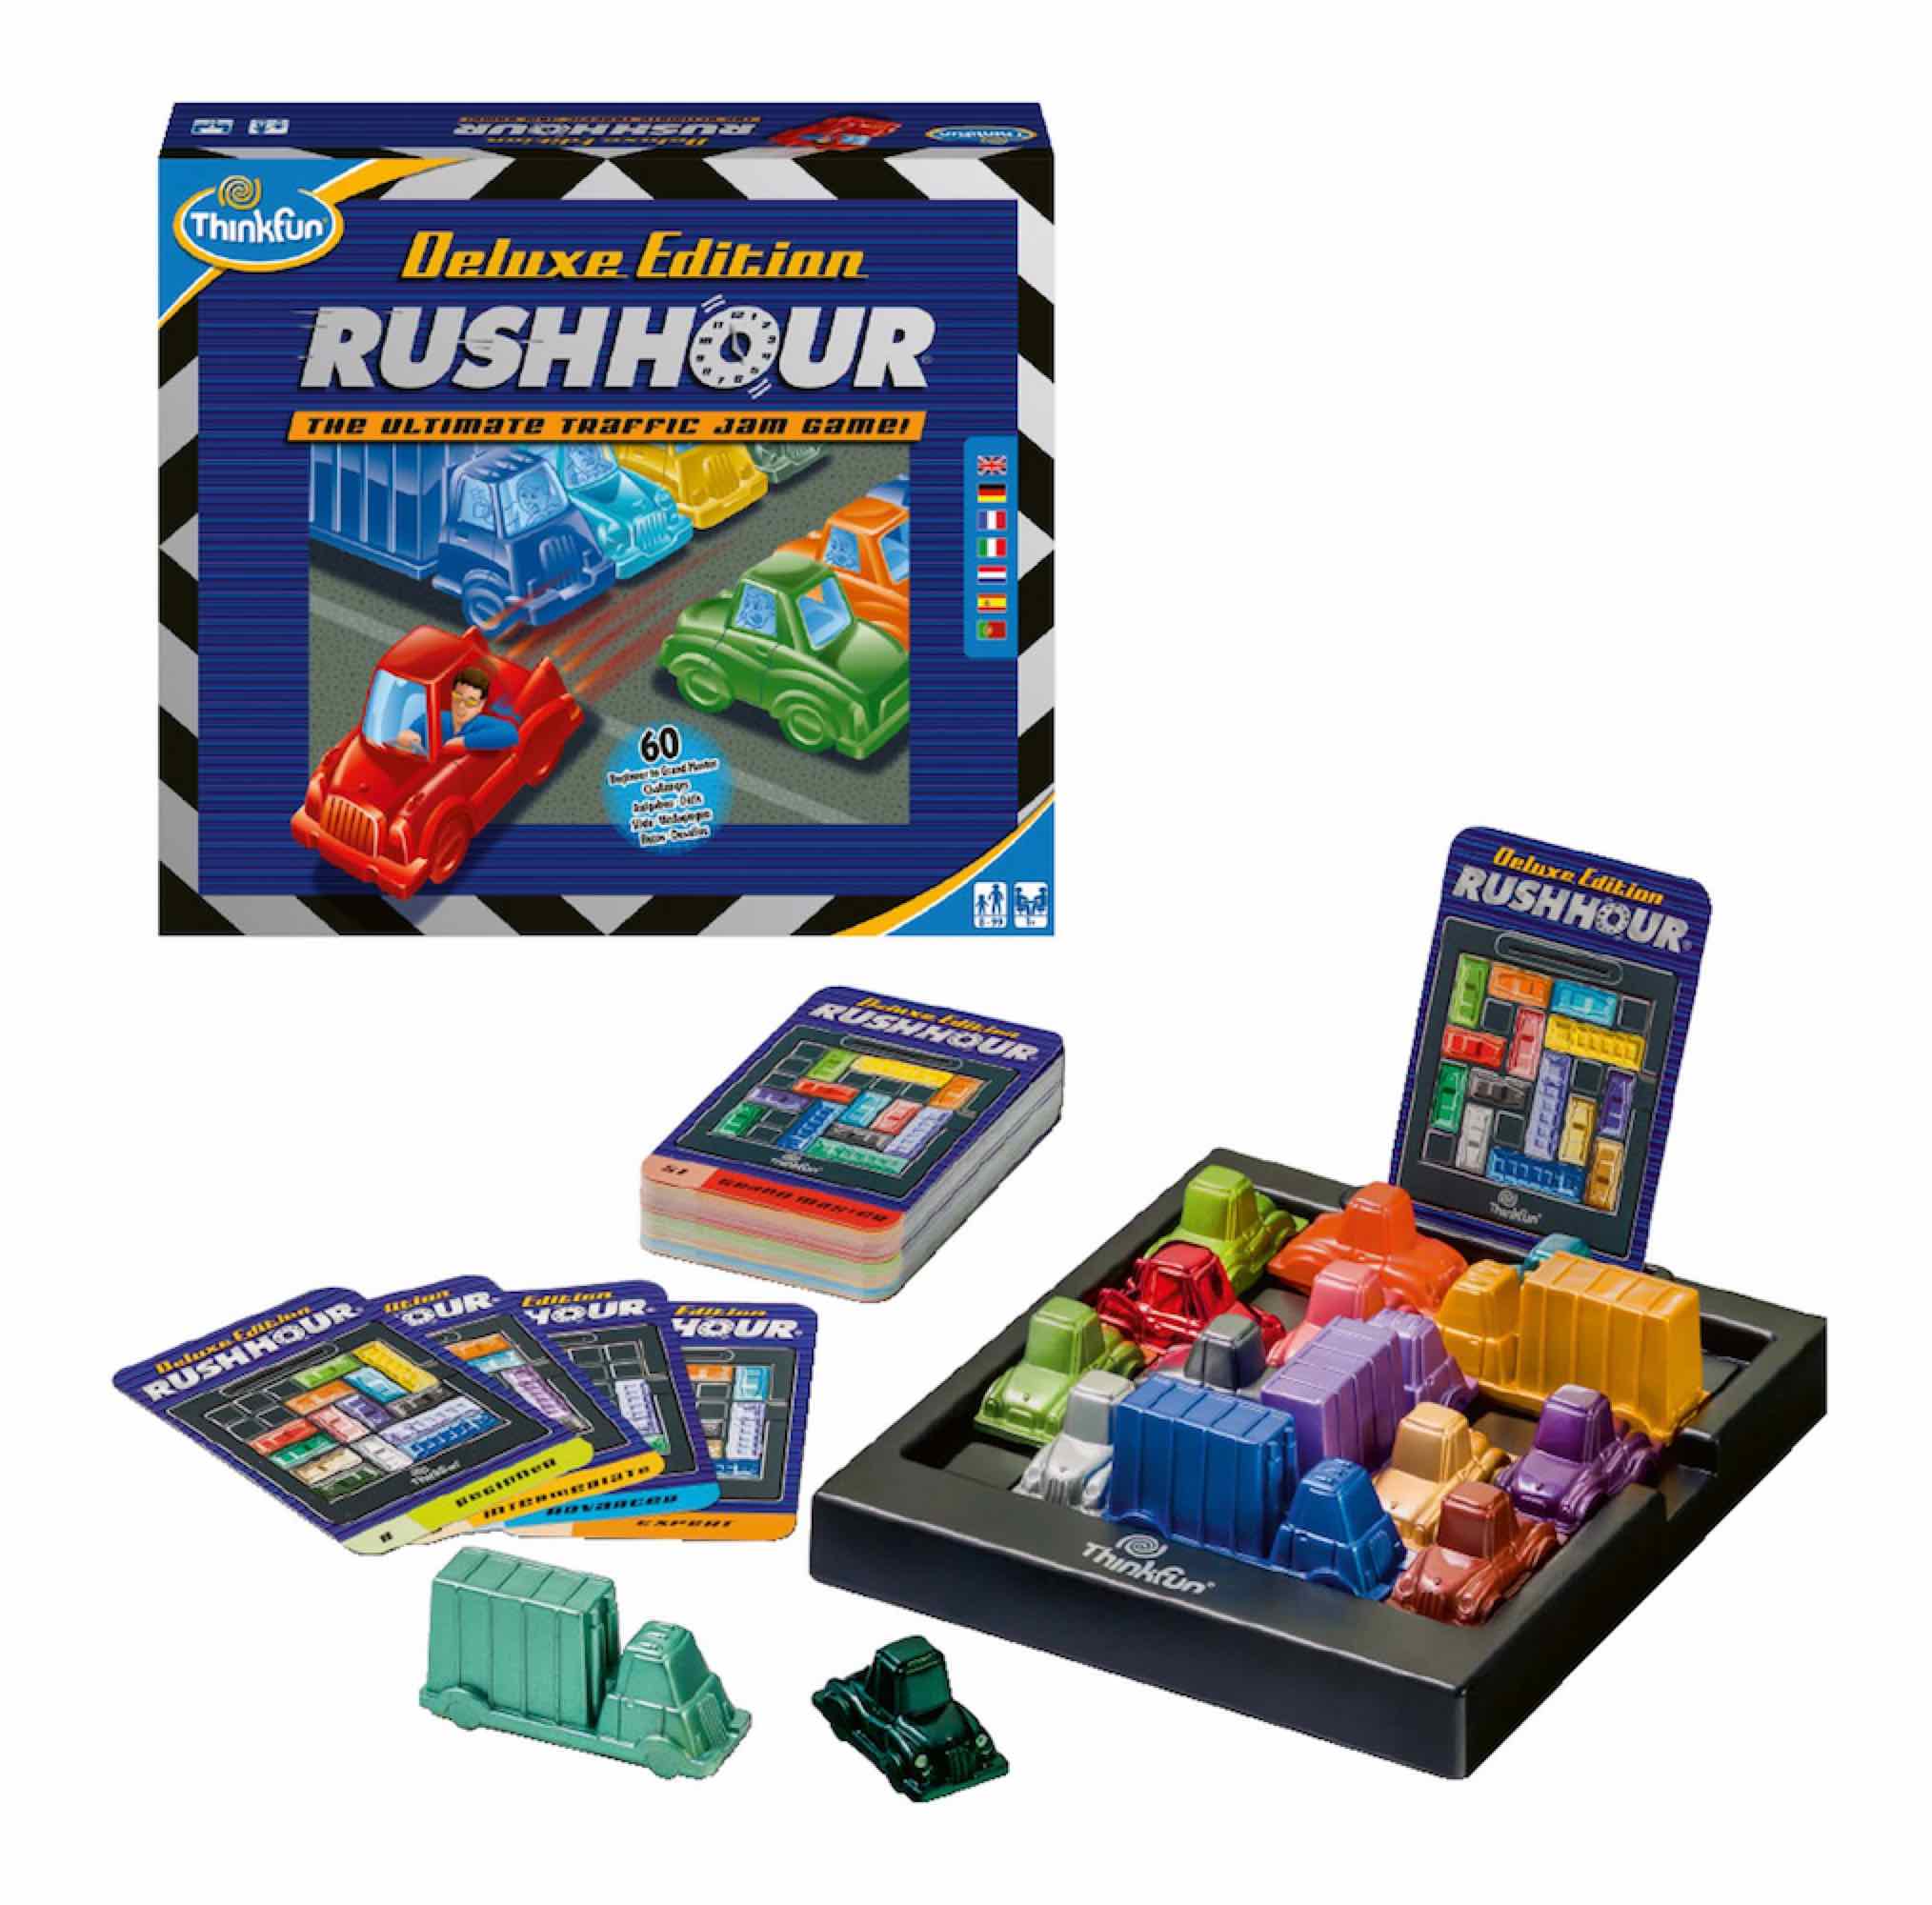 RUSH HOUR DELUXE EDITION